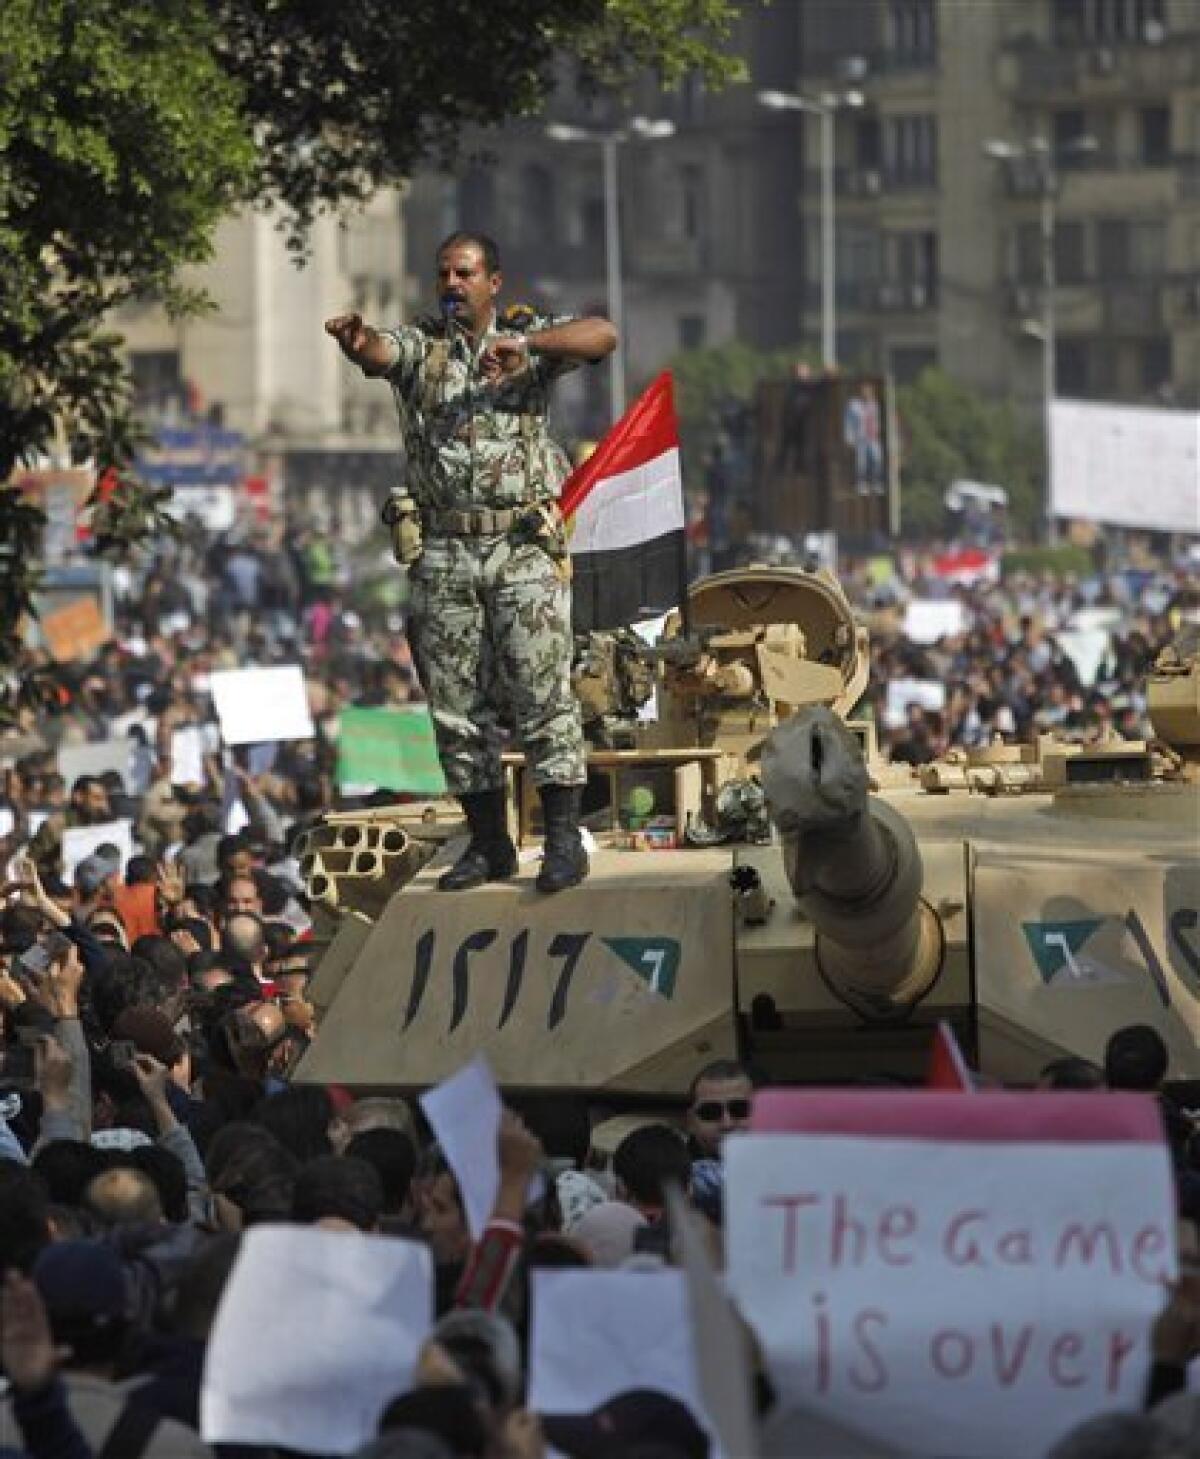 An Egyptian army Lieutenant Colonel stands on top of a tank, as demonstrators arrive in Tahrir, or Liberation, Square in Cairo, Egypt, Tuesday, Feb. 1, 2011. More than a quarter-million people flooded into the heart of Cairo Tuesday, filling the city's main square in by far the largest demonstration in a week of unceasing demands for President Hosni Mubarak to leave after nearly 30 years in power. (AP Photo/Emilio Morenatti)